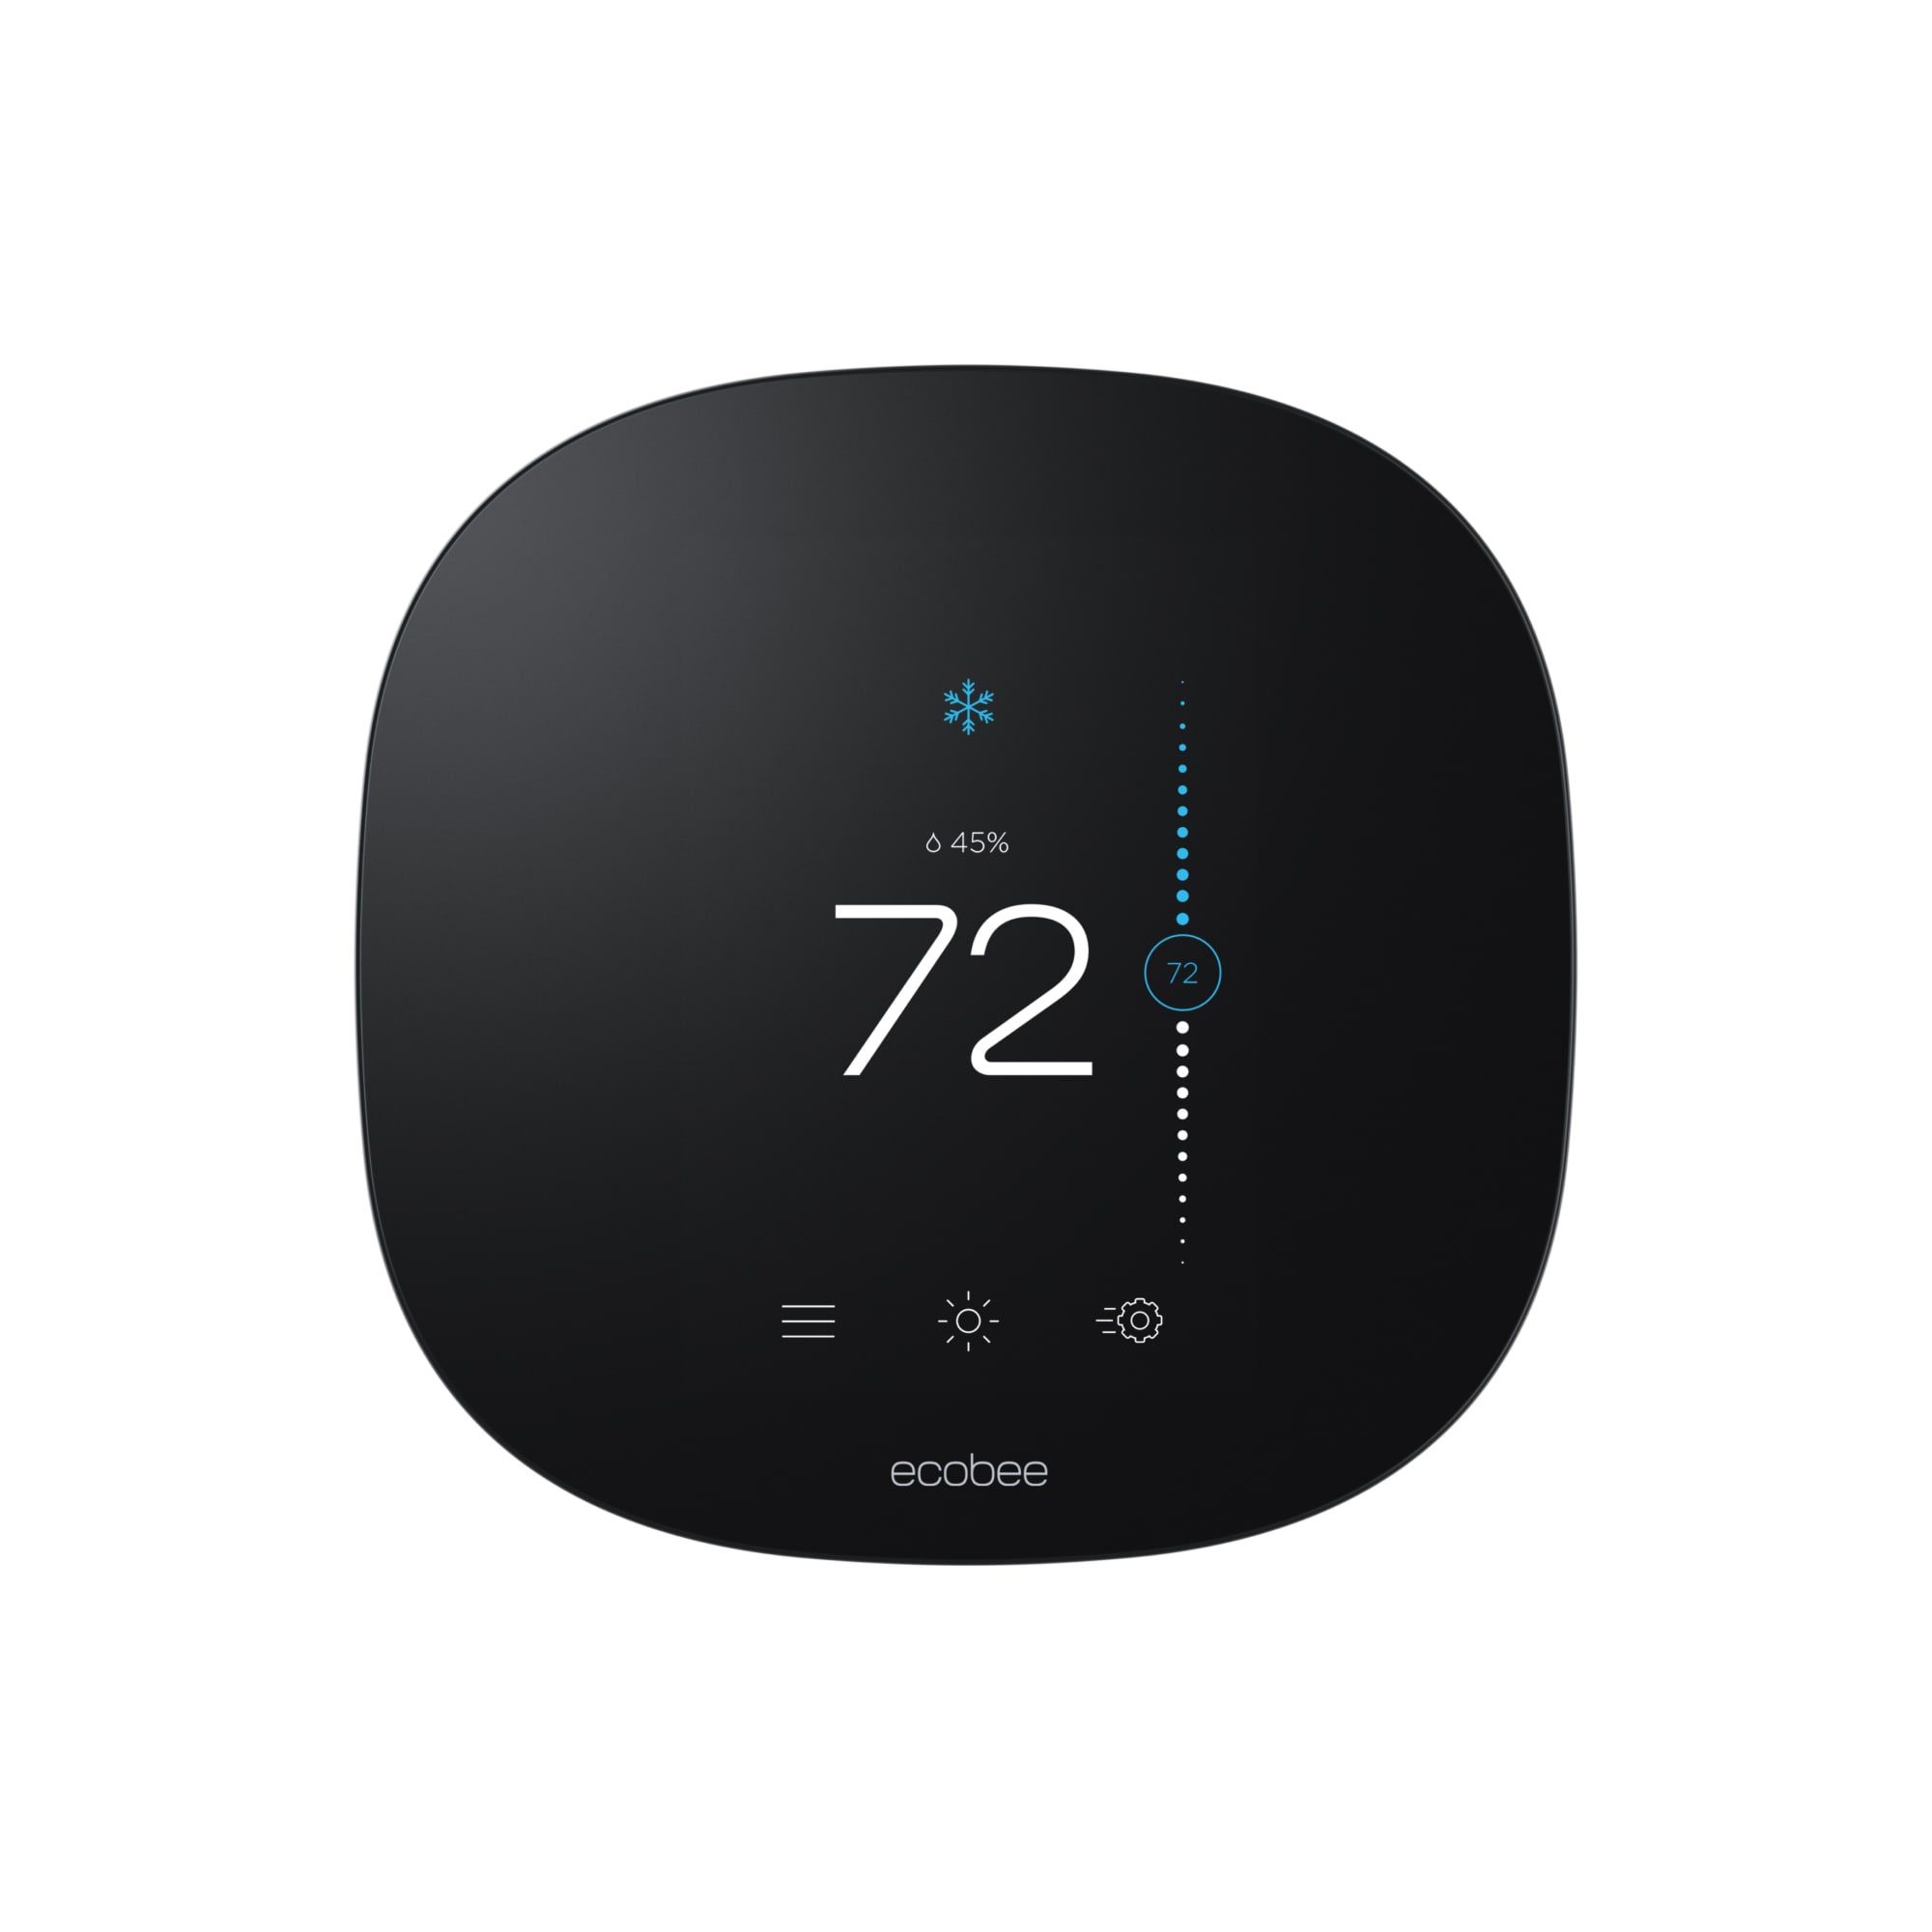 3 Black Smart Thermostat with Wi-Fi Compatibility | - ecobee EB-STATE3-02